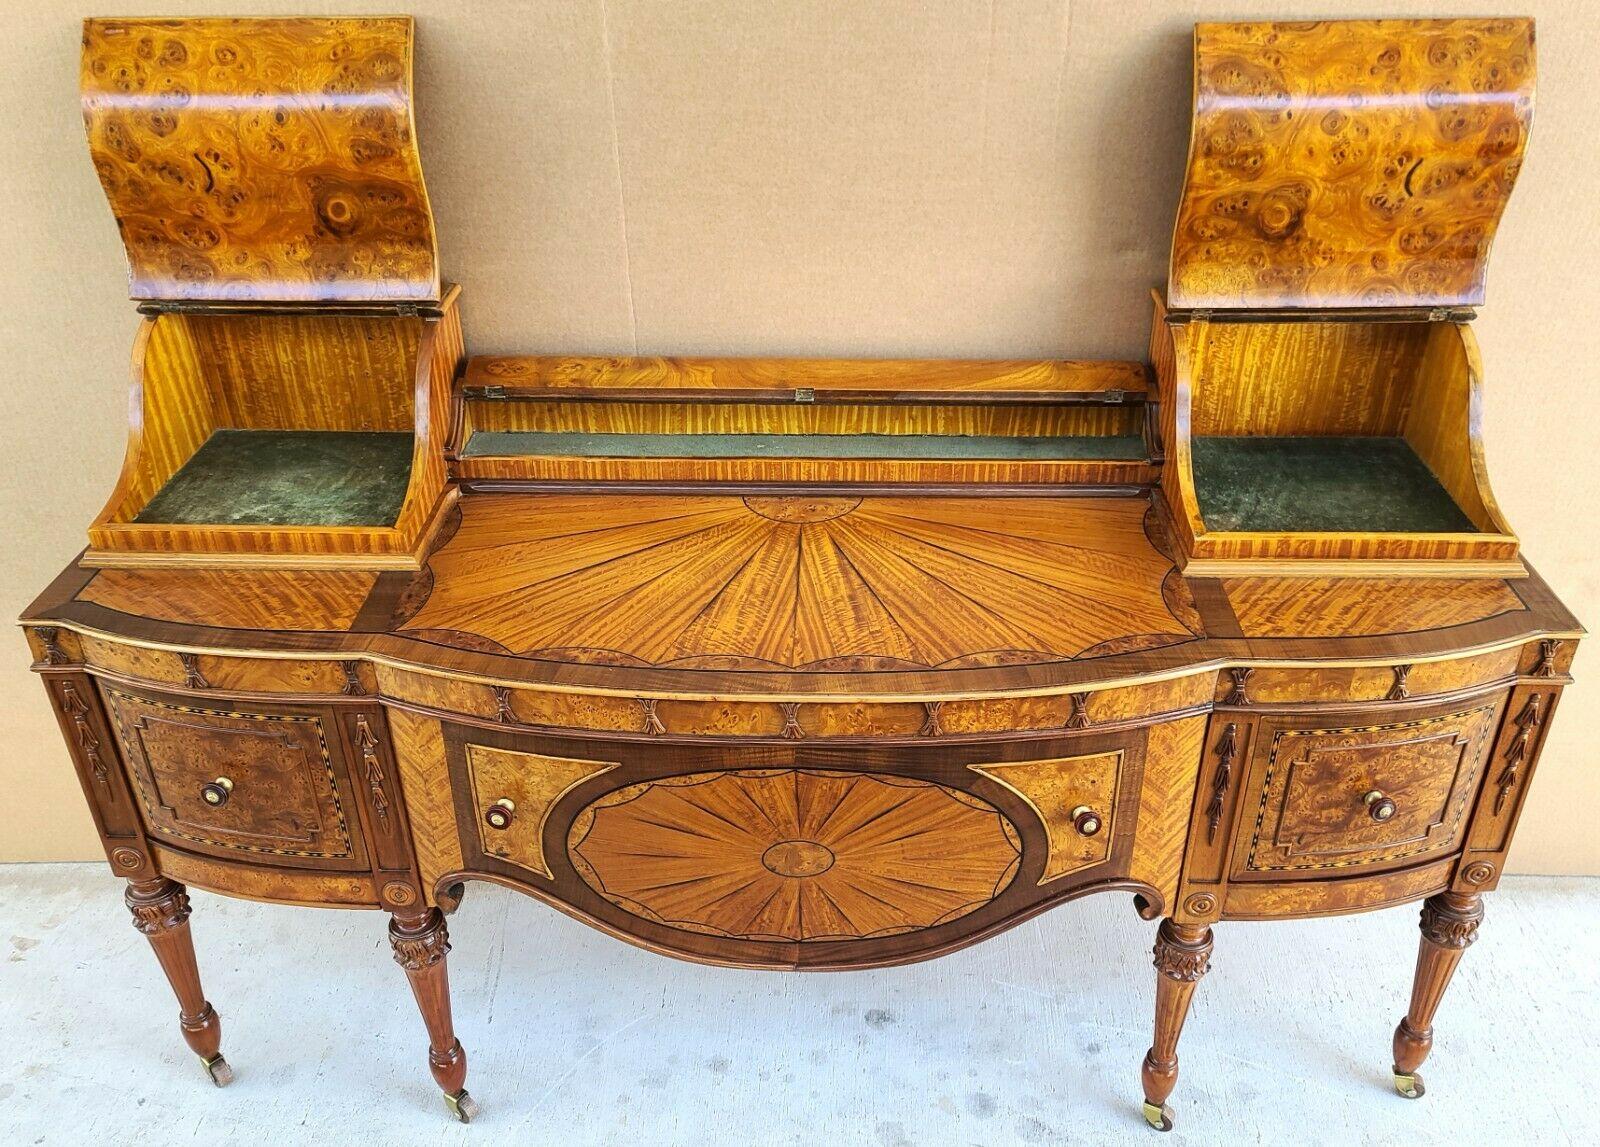 Offering one of our recent palm beach estate fine furniture acquisitions of an 
Antique early 1900s Art Nouveau Amboyna burl hand-carved walnut vanity table

Approximate measurements in inches
33